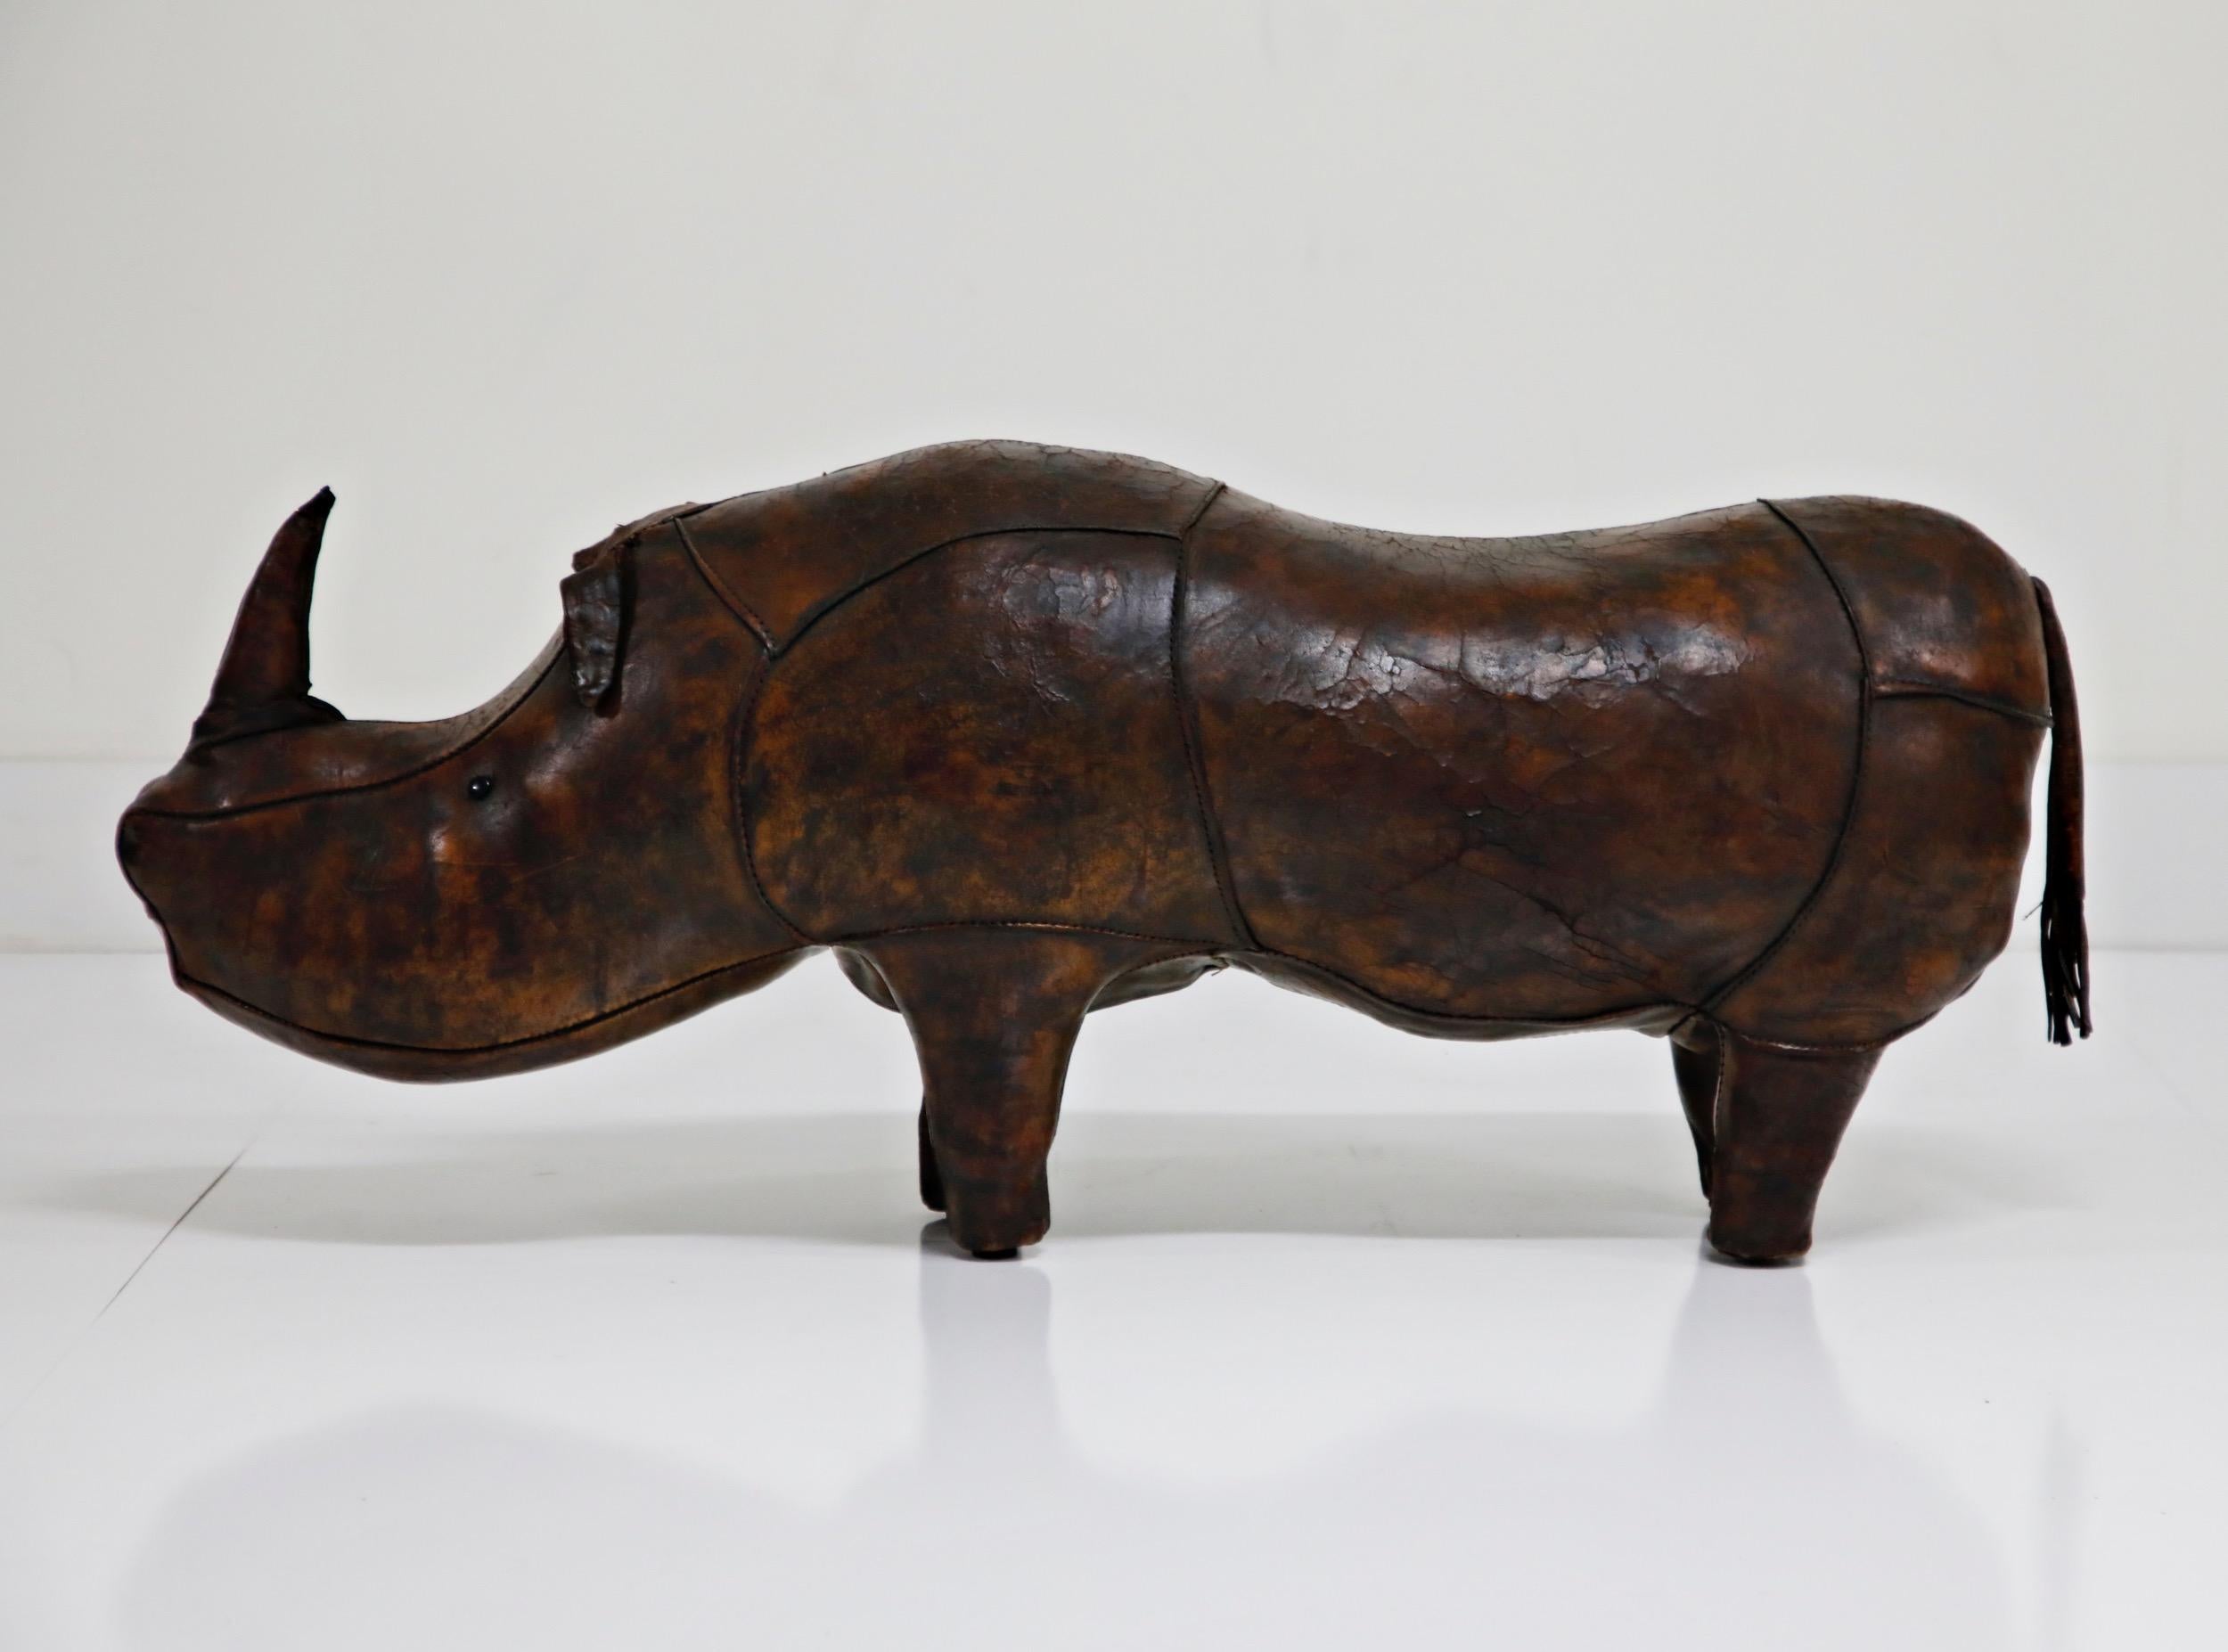 Mid-20th Century Large Rhinoceros Footstool by Dimitri Omersa for Abercrombie and Fitch, Signed